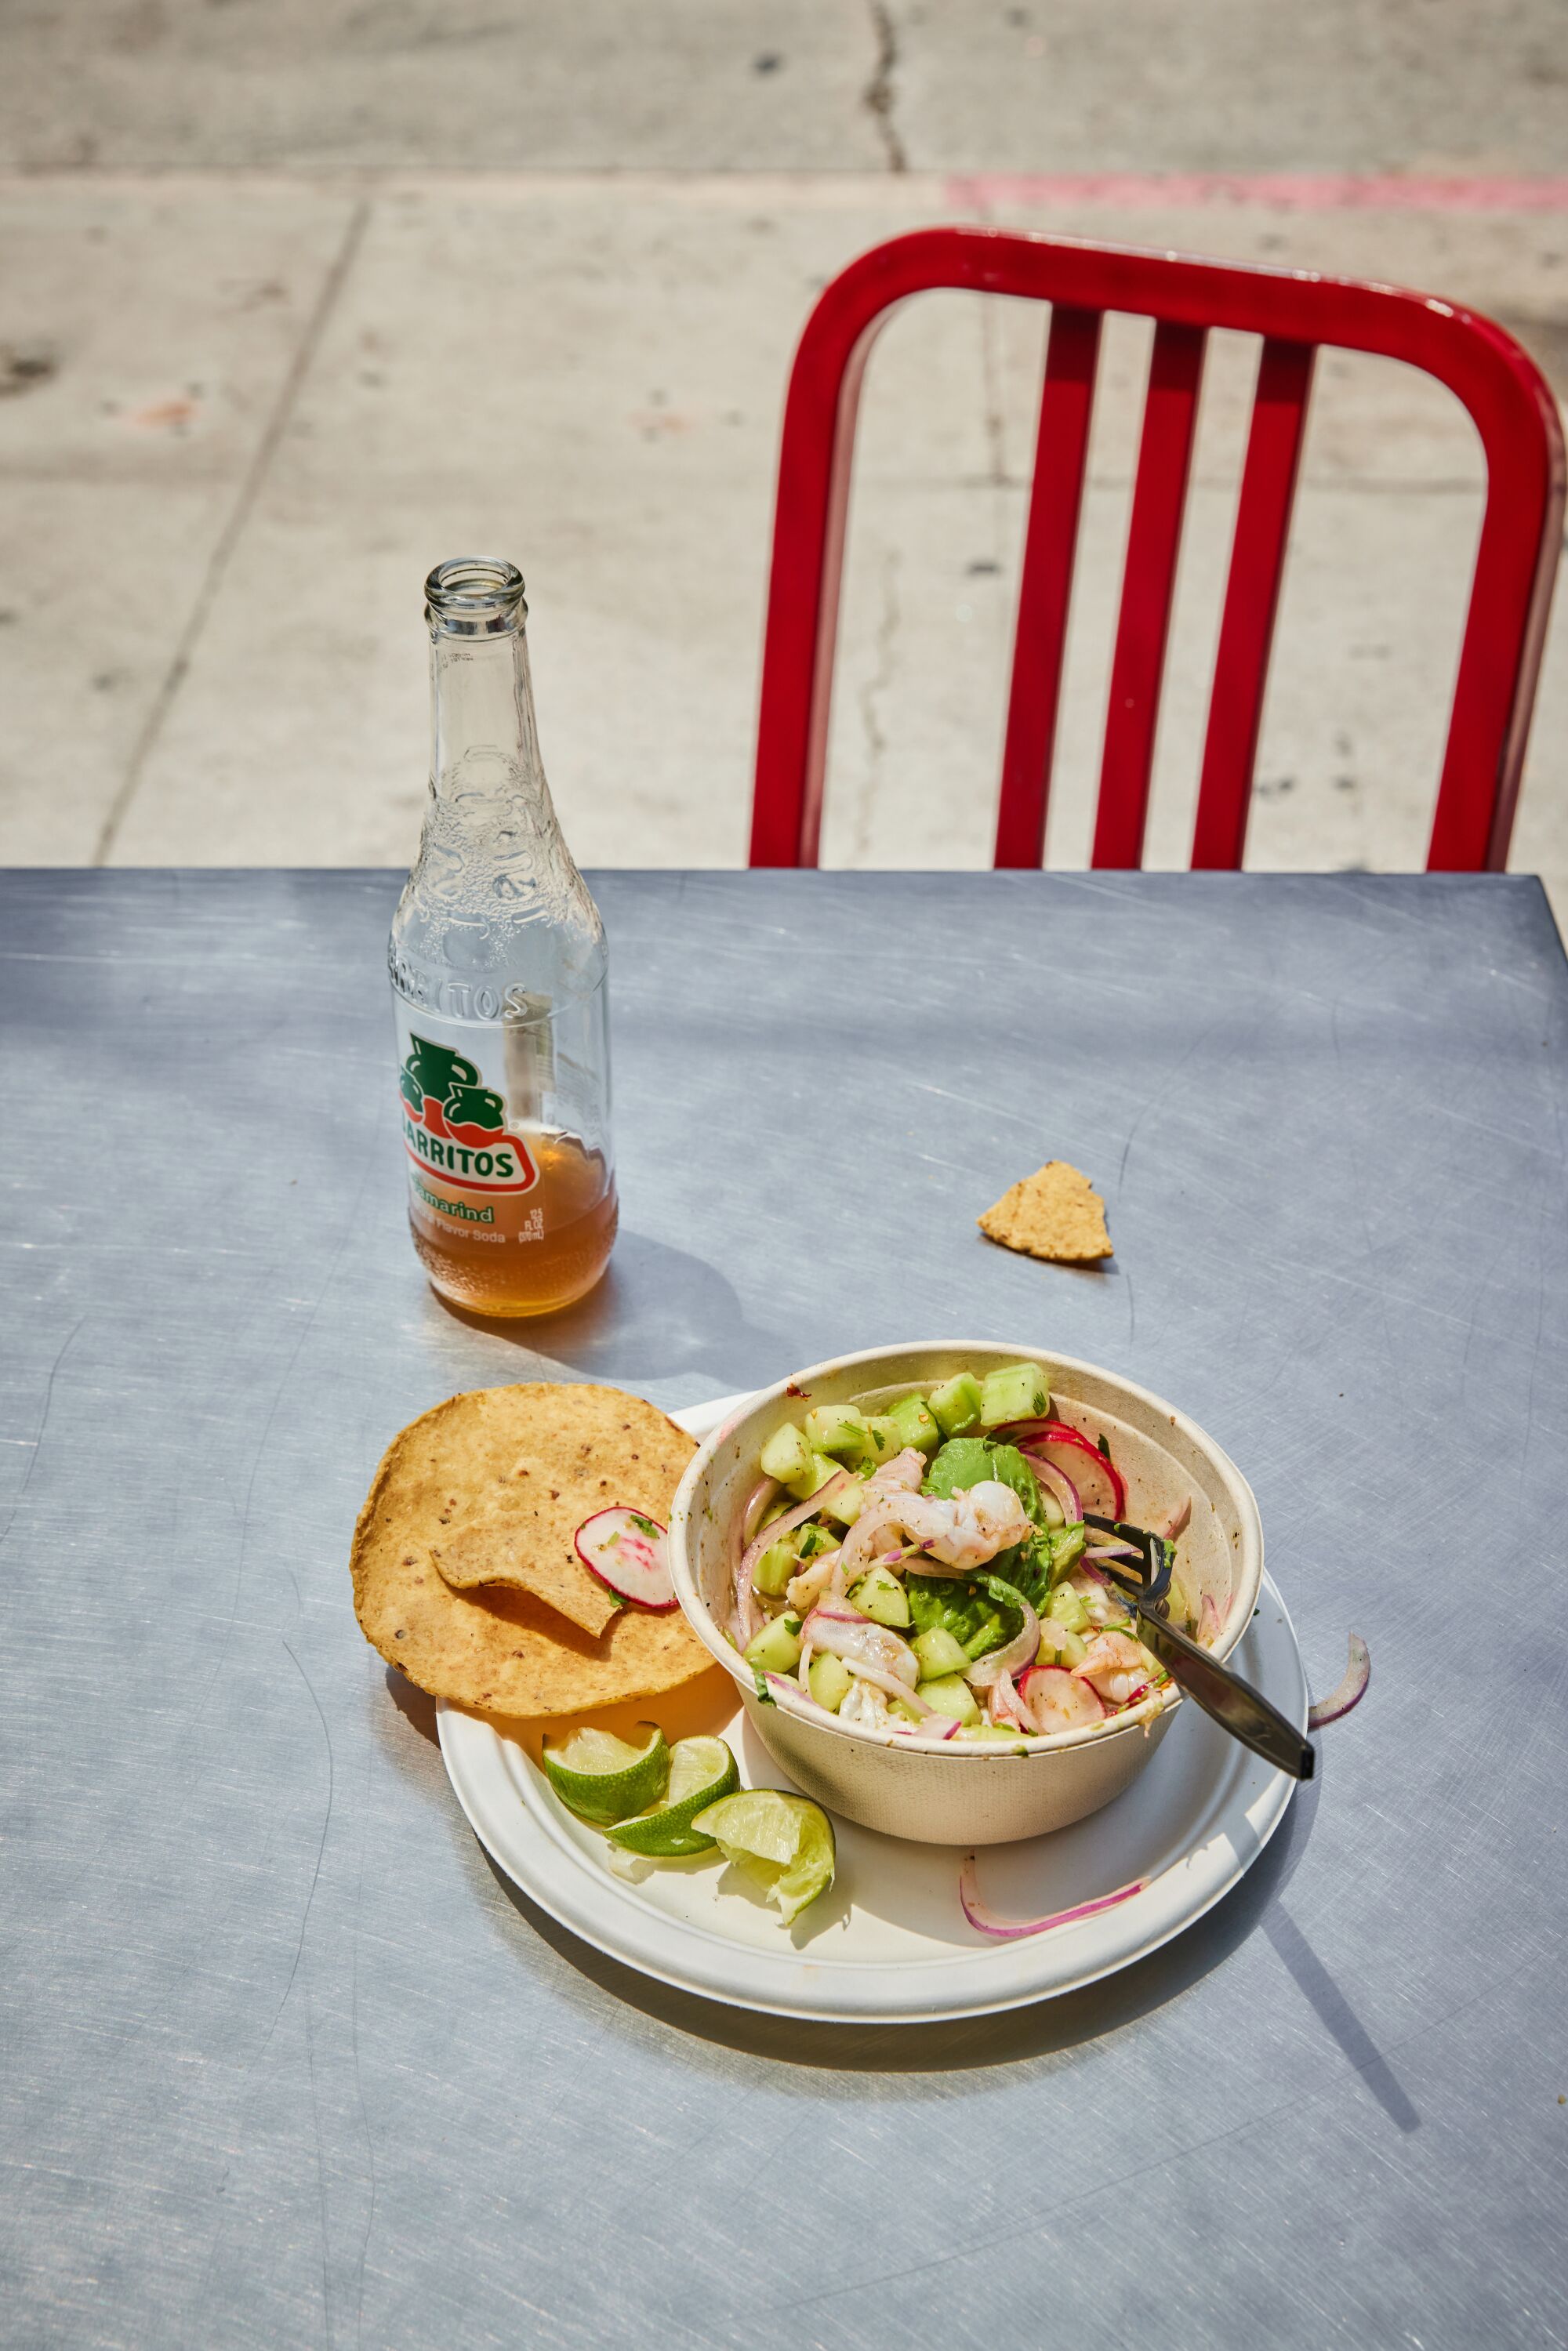 A plate of food and Jarritos bottle sit on a silver table outdoors.